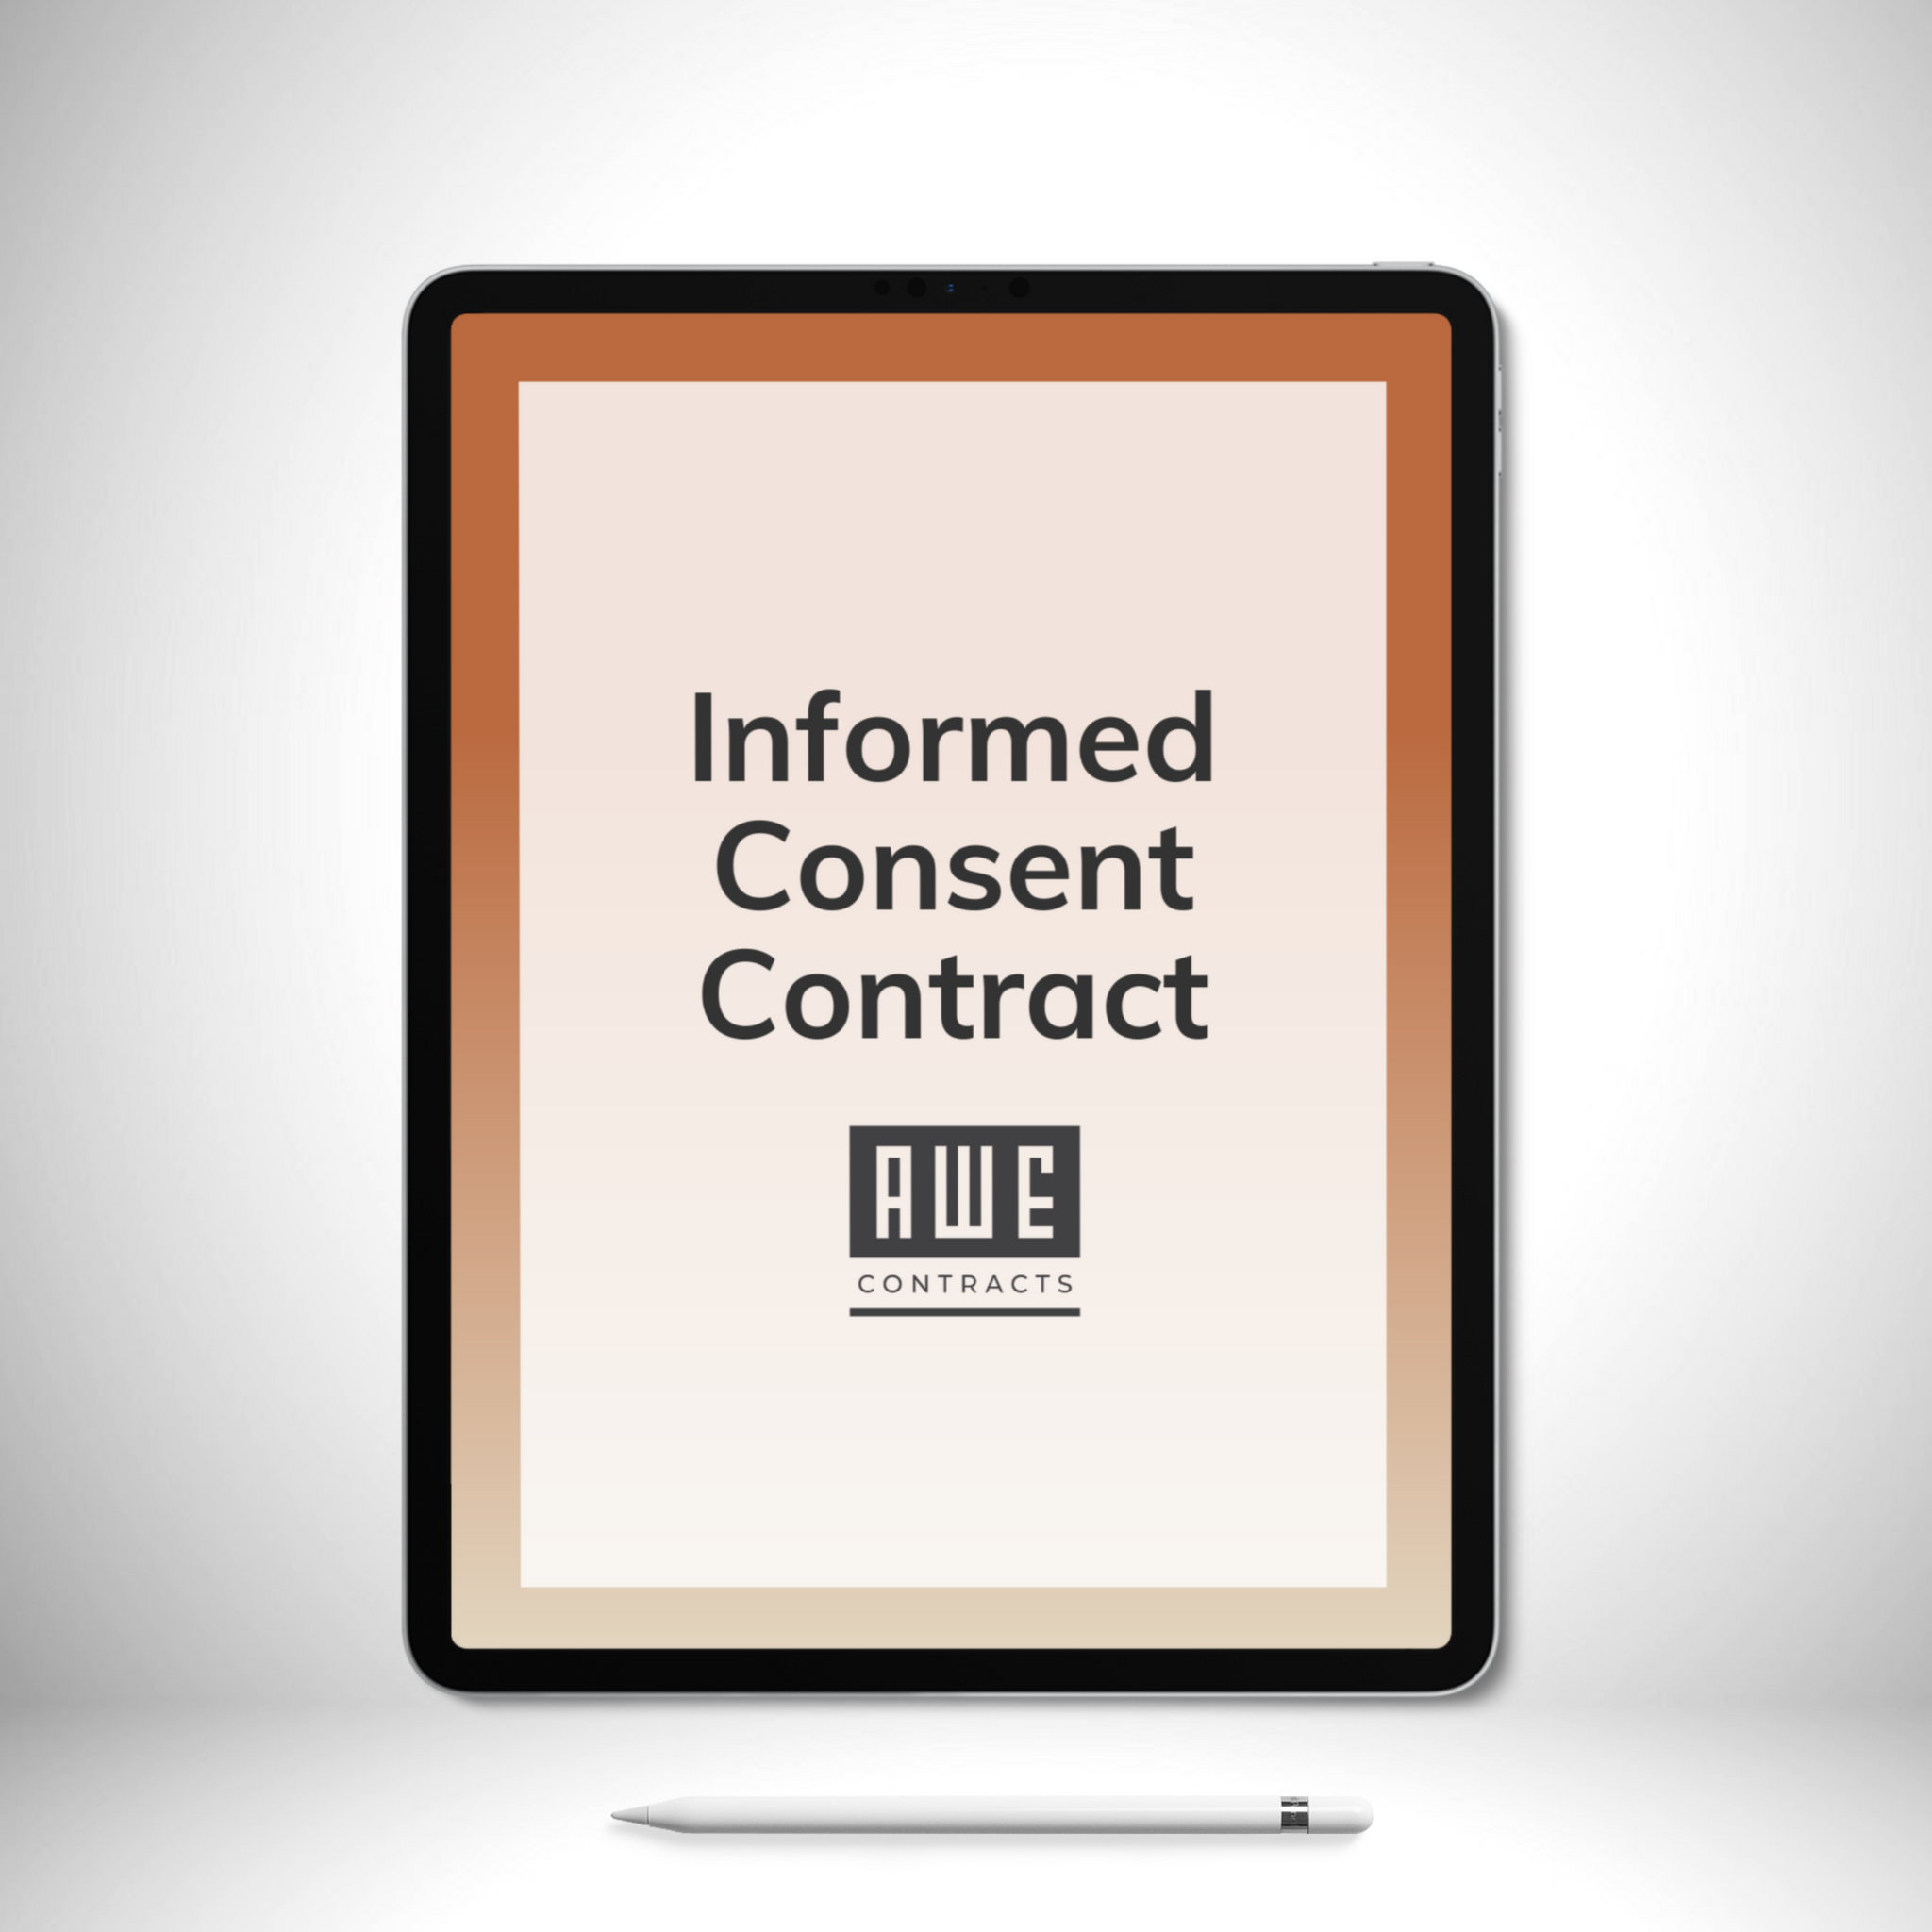 Informed Consent Contract